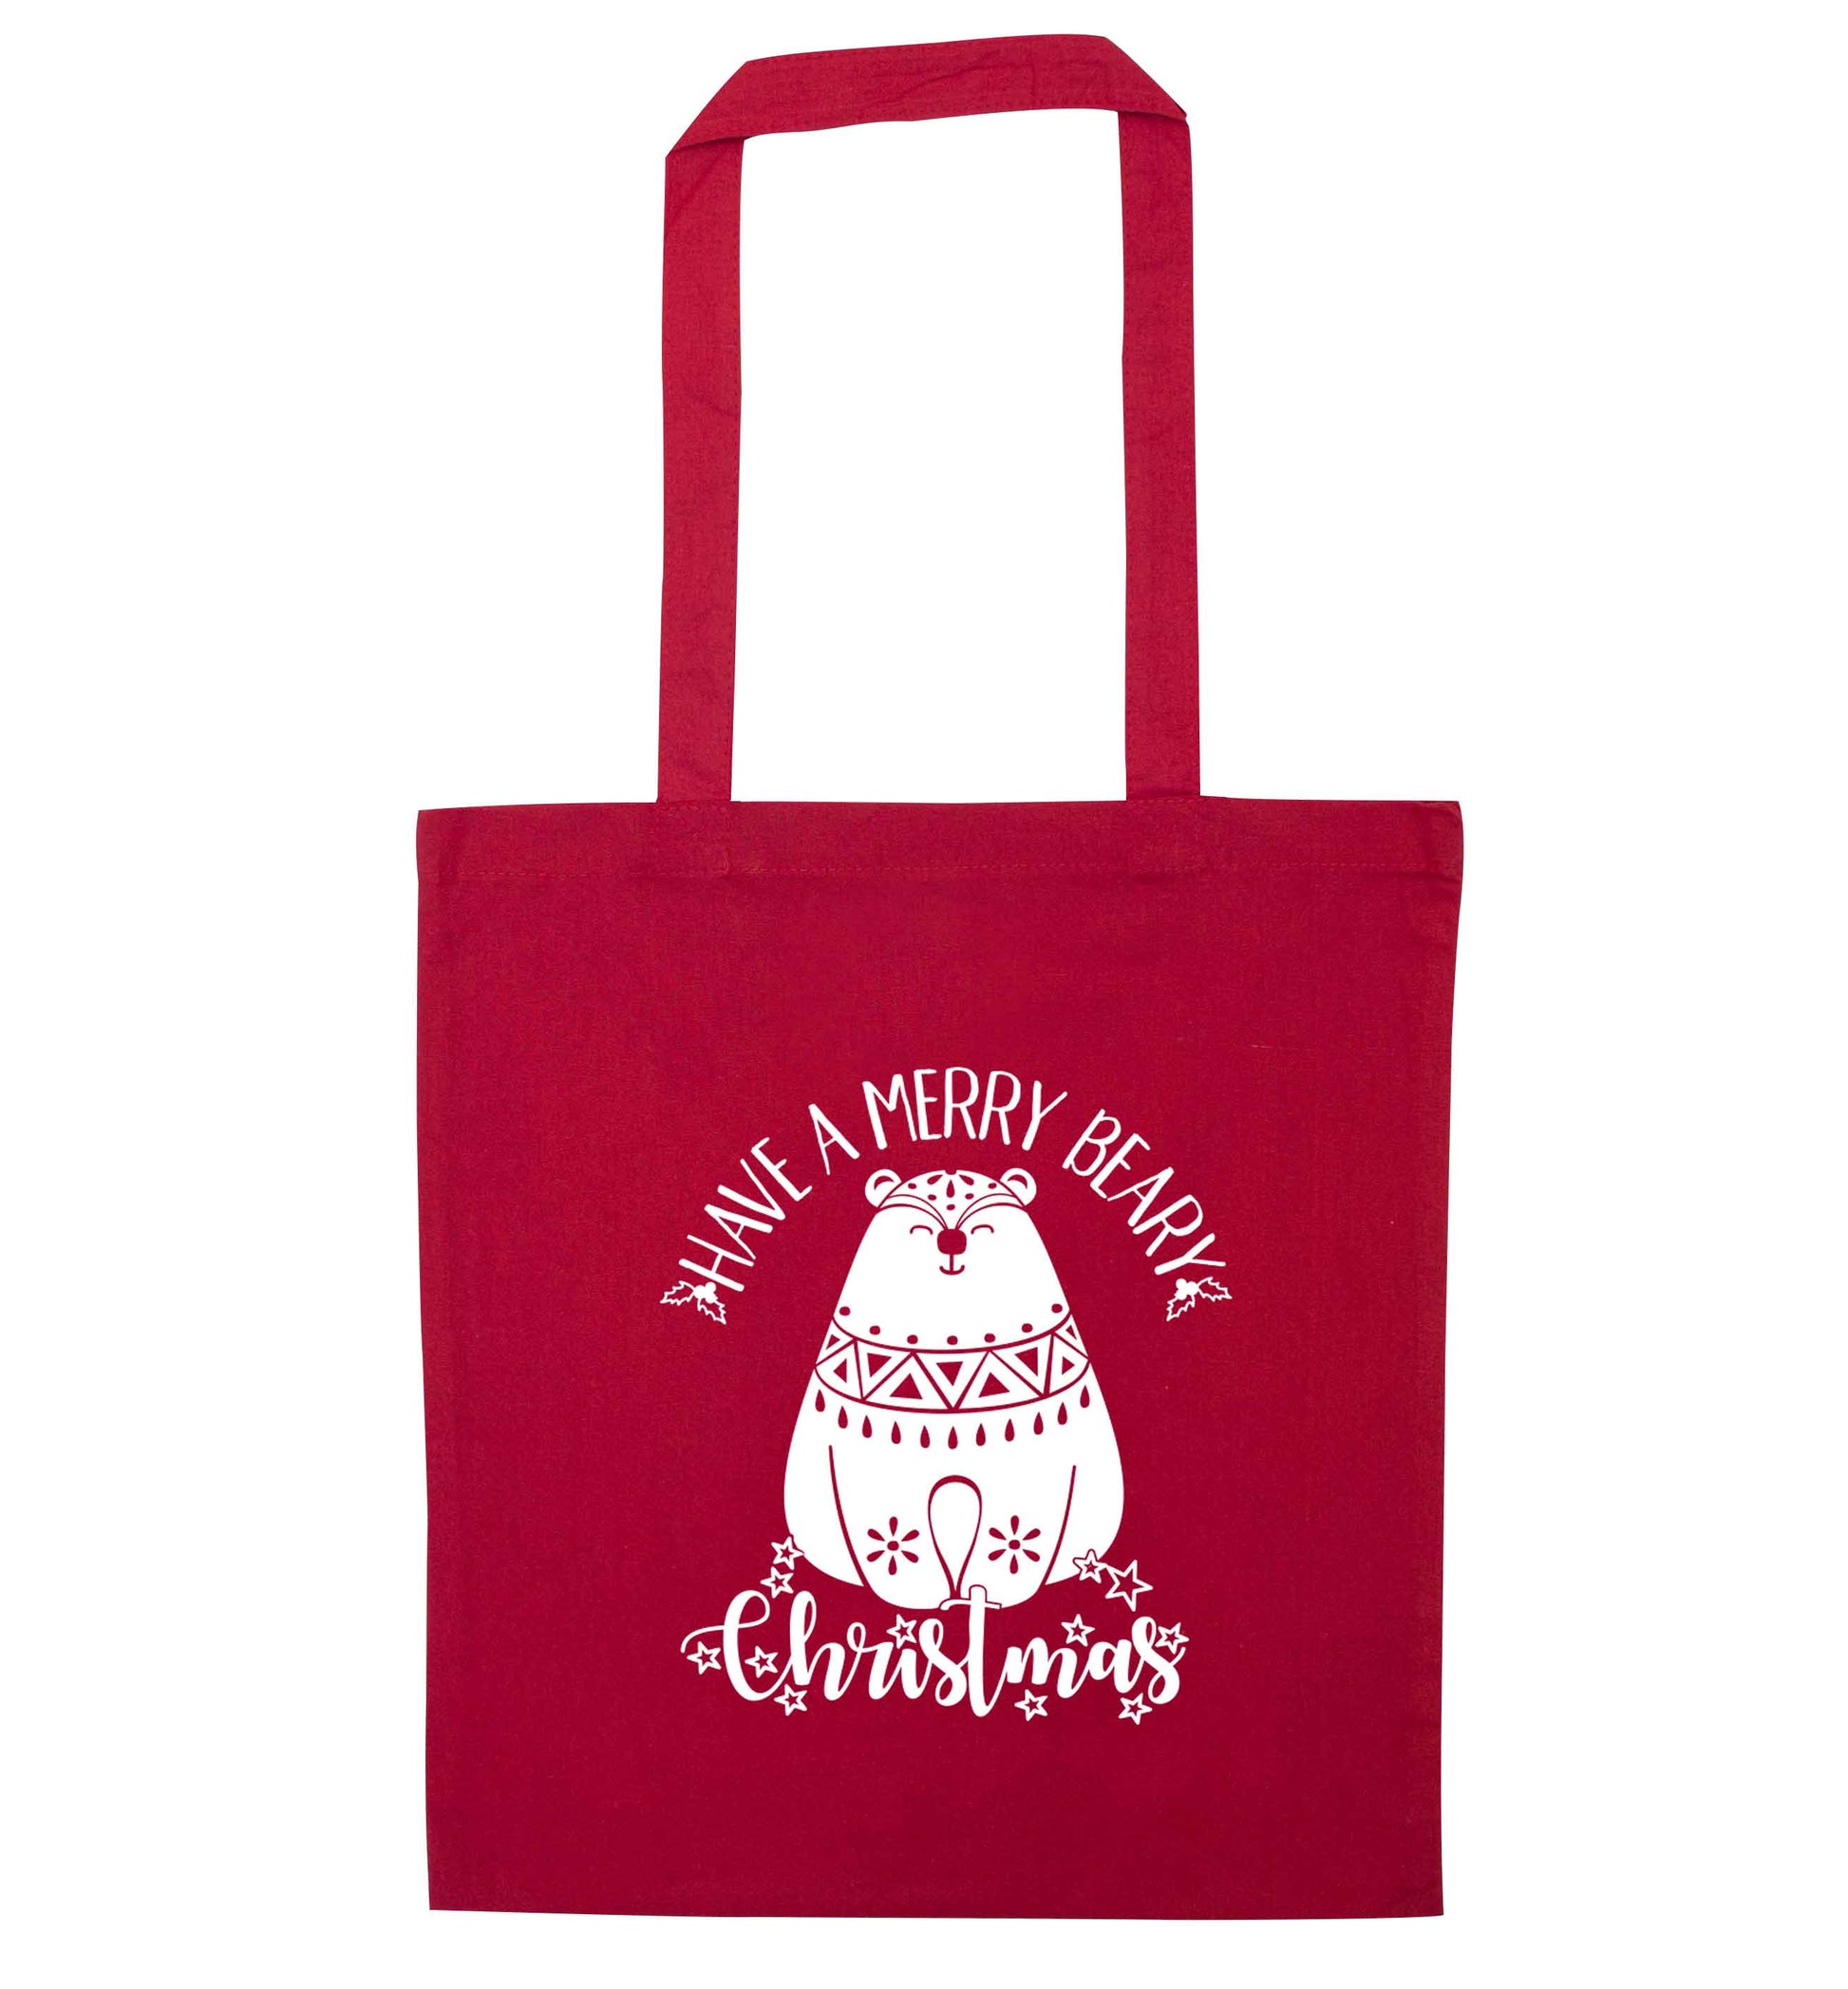 Have a merry beary Christmas red tote bag